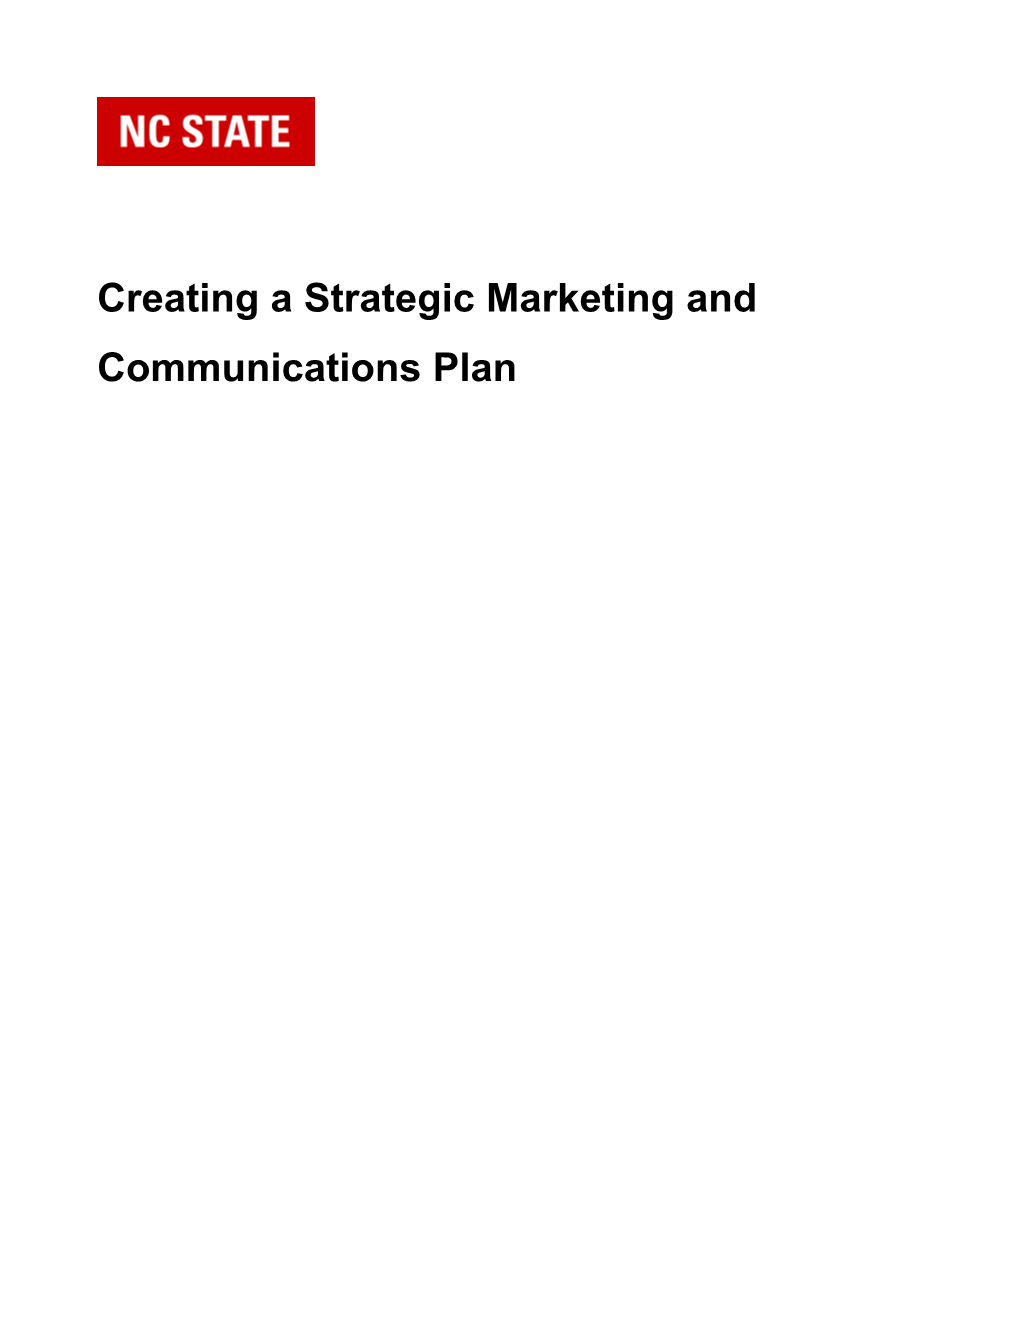 Creating a Strategic Marketing and Communications Plan